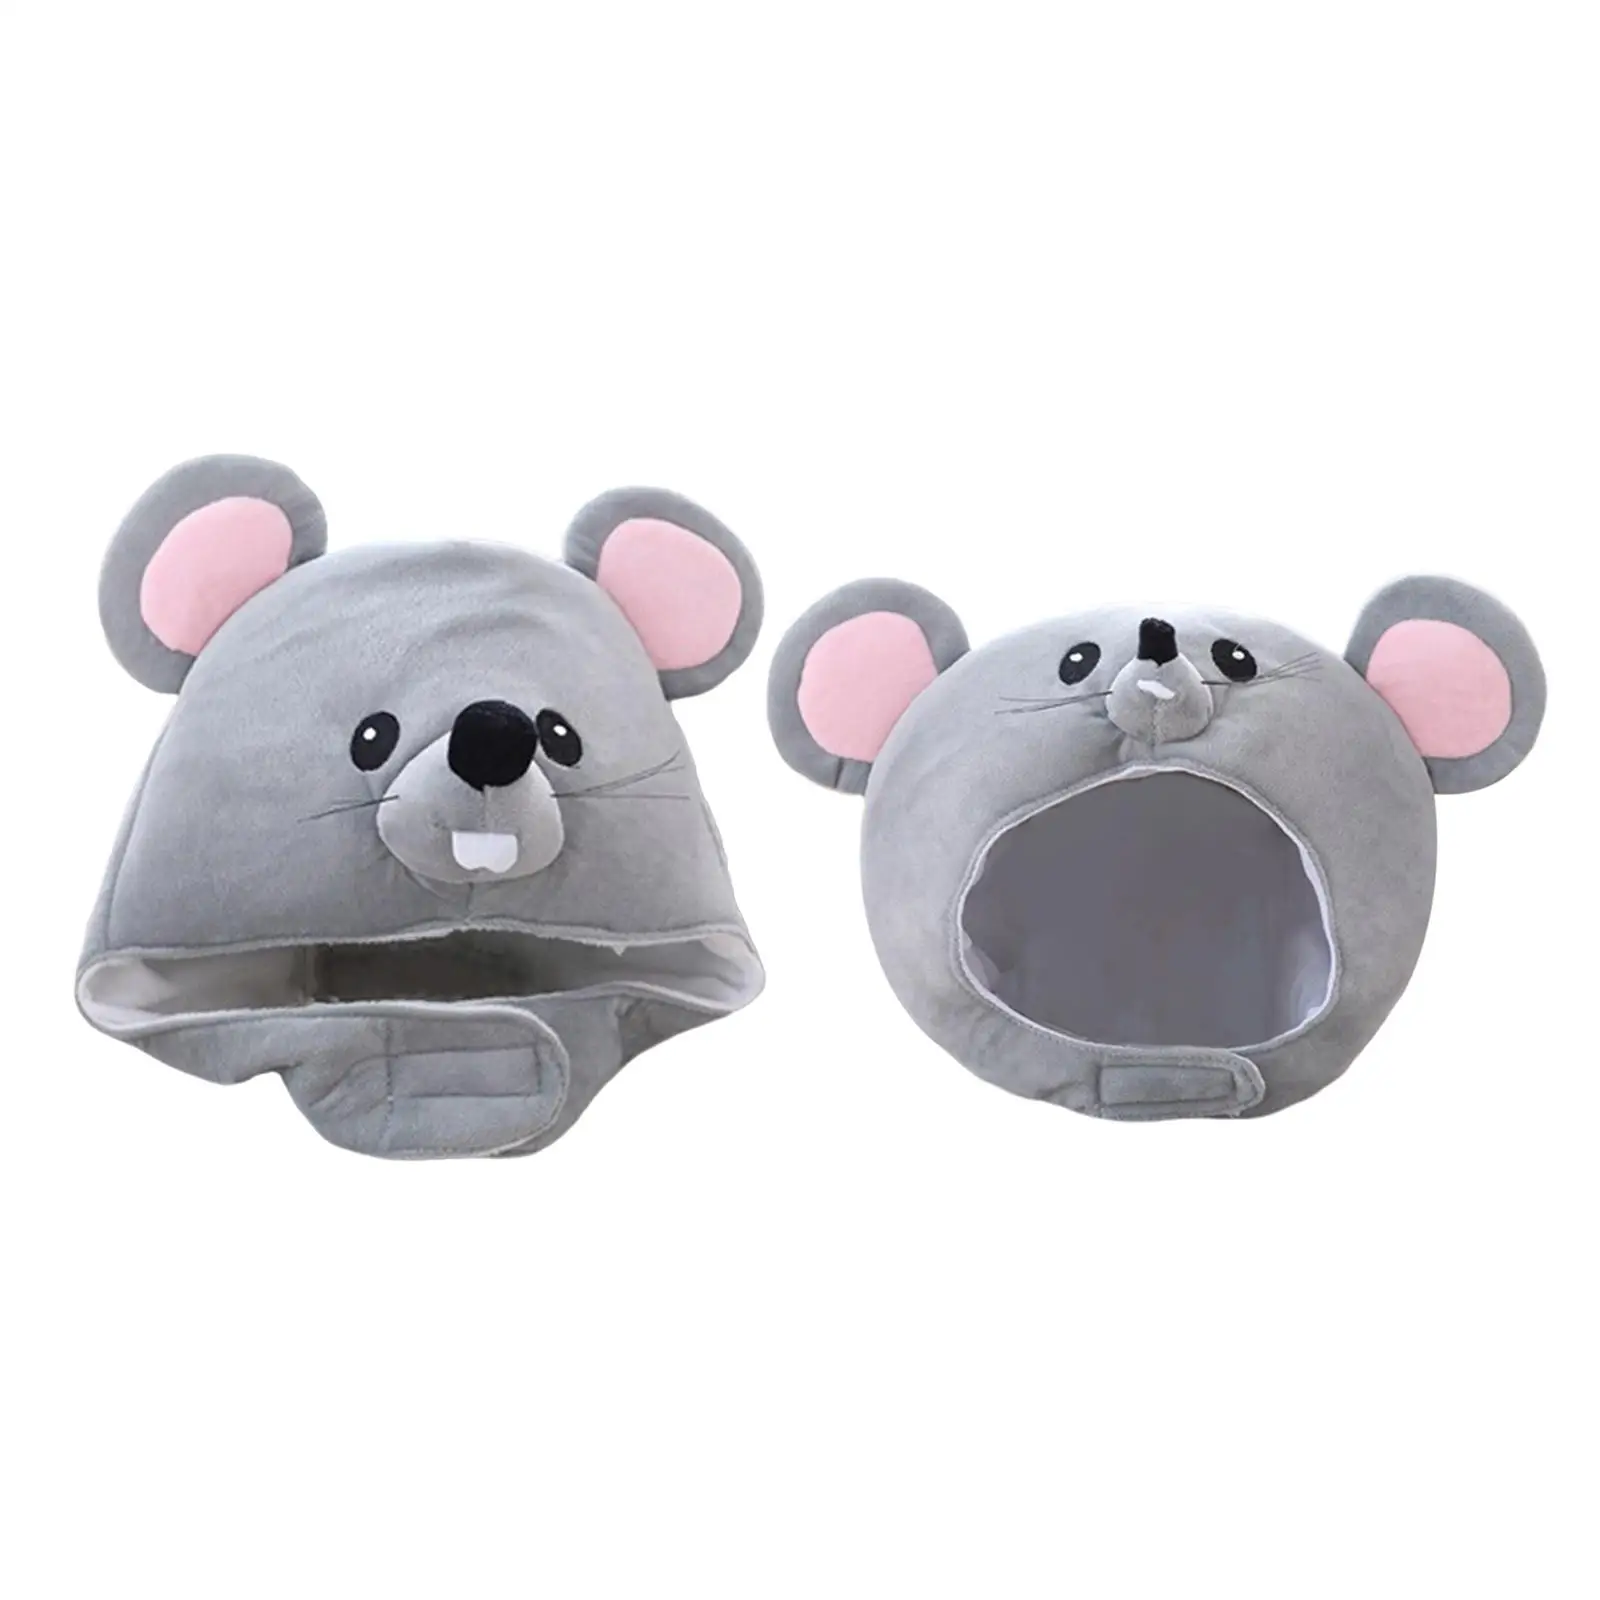 Cute Mouse Headgear Teens Gift Photography Props Headband Gray Soft for Party Cosplay Halloween Selfie Decor